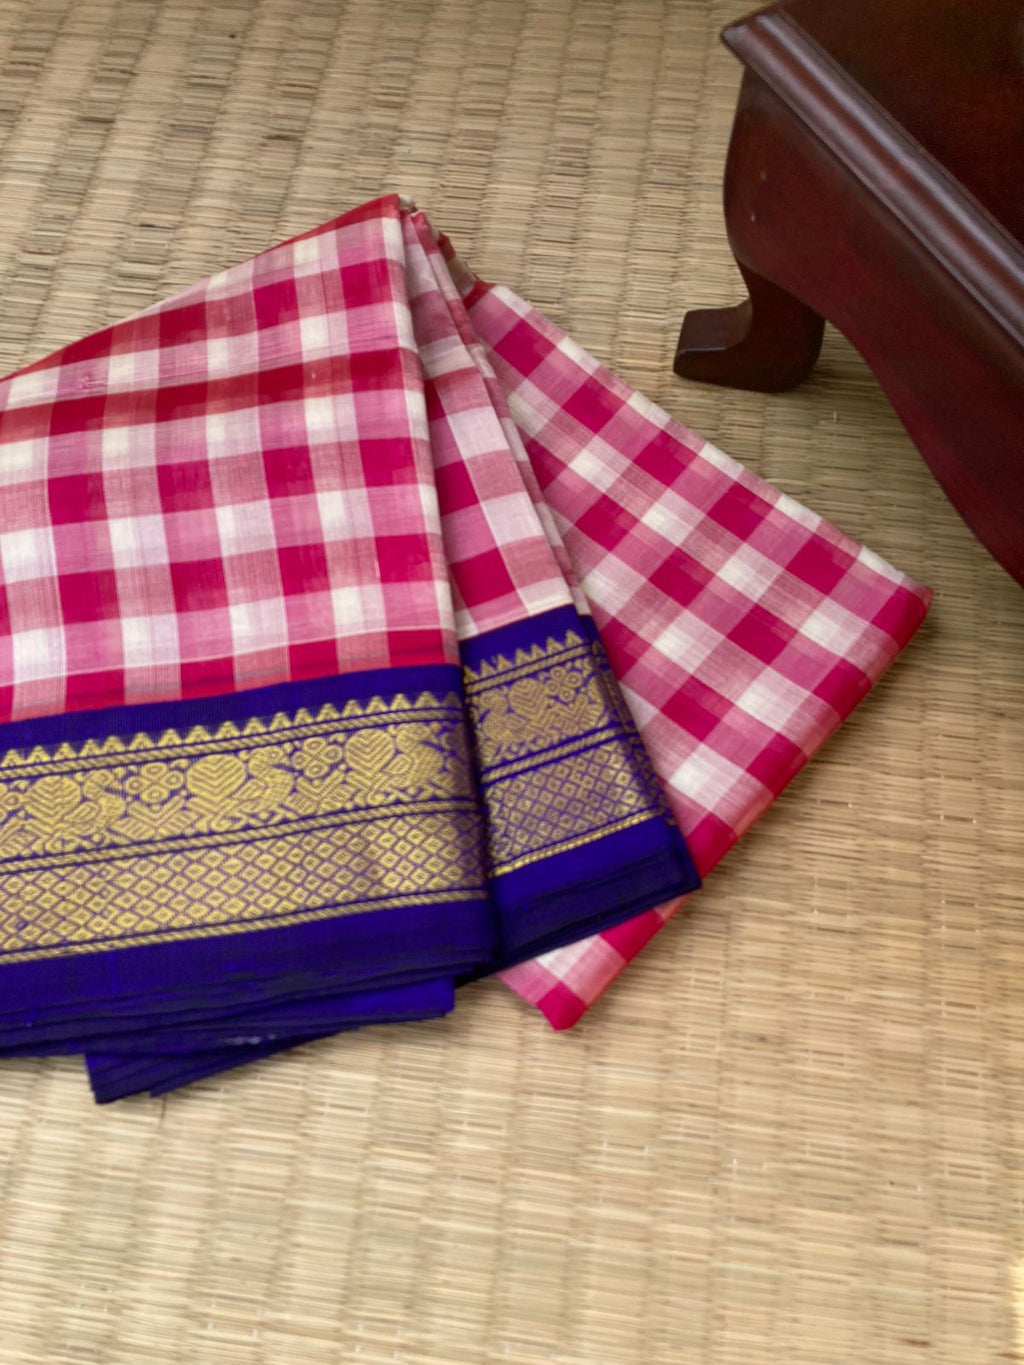 Paalum Palamum Kattams Korvai Silk Cottons - off white and deep pink chex with ink blue